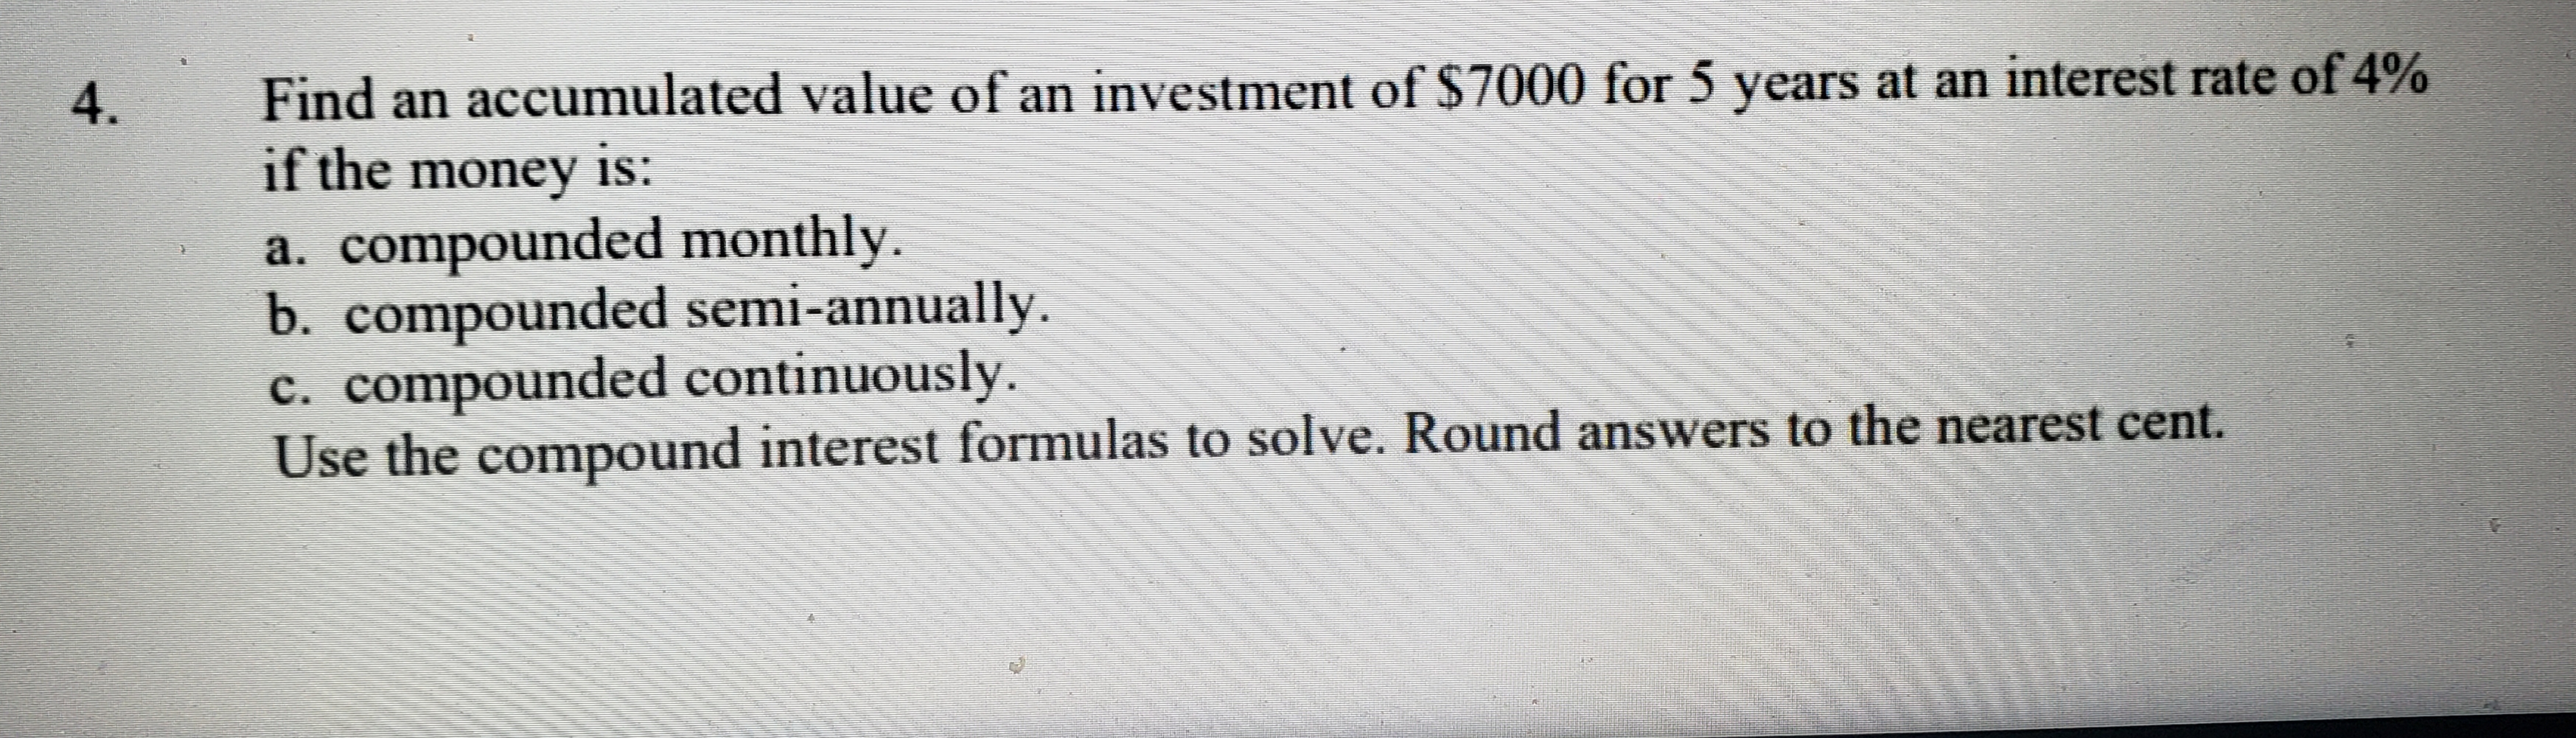 Find an accumulated value of an investment of $7000 for 5 years at an interest rate of 4%
if the money is:
a. compounded monthly.
b. compounded semi-annually.
c. compounded continuously.
Use the compound interest formulas to solve. Round answers to the nearest cent.
4.
